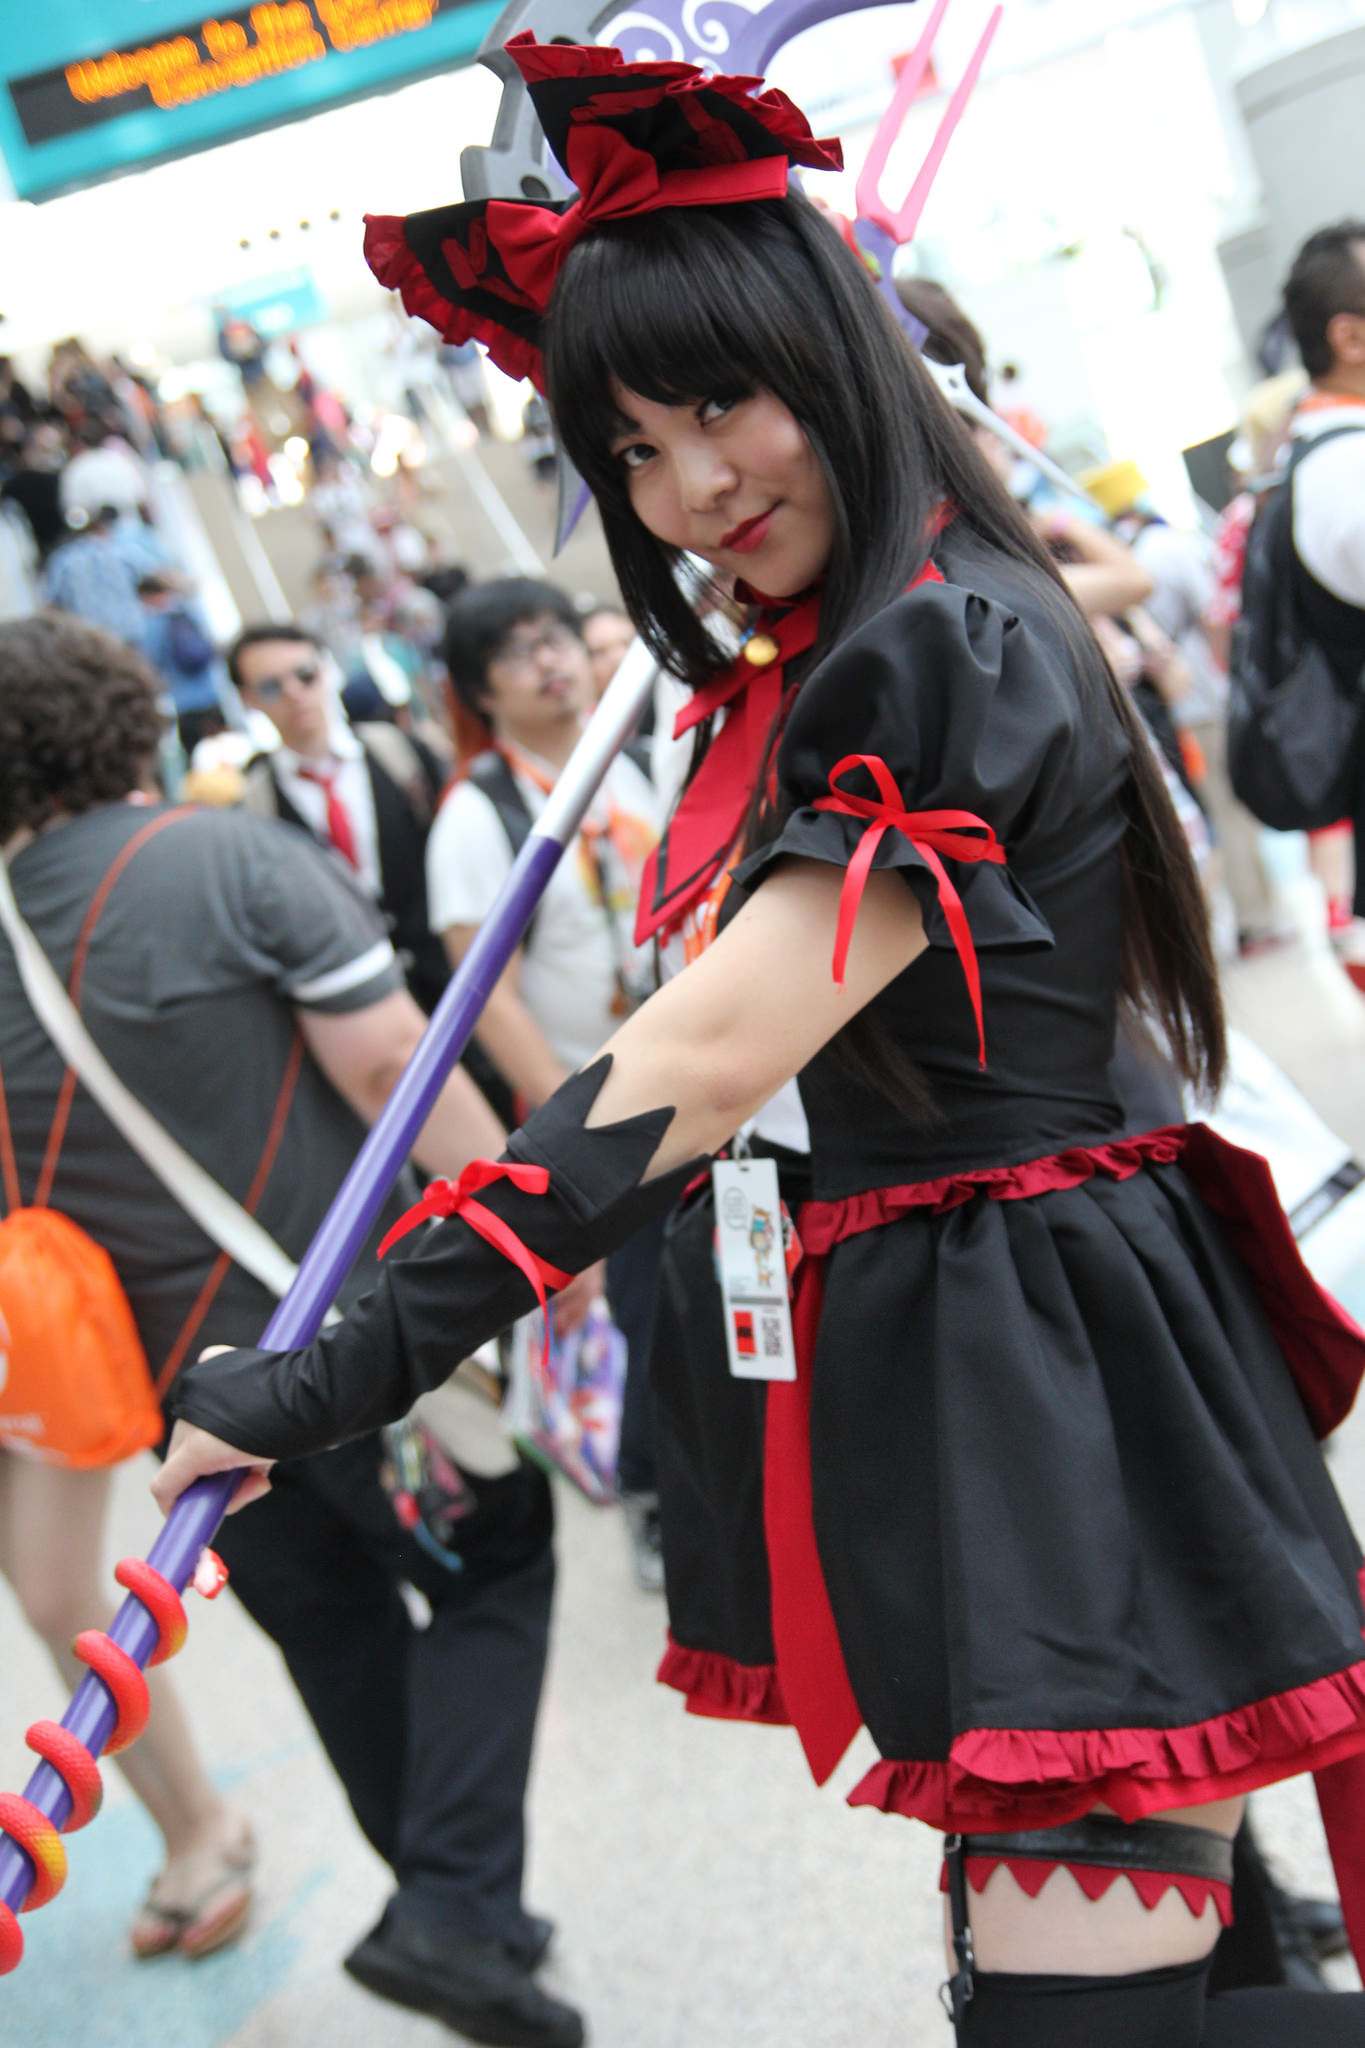 ax20167 Anime Expo 2016 in Los Angeles Convention Center